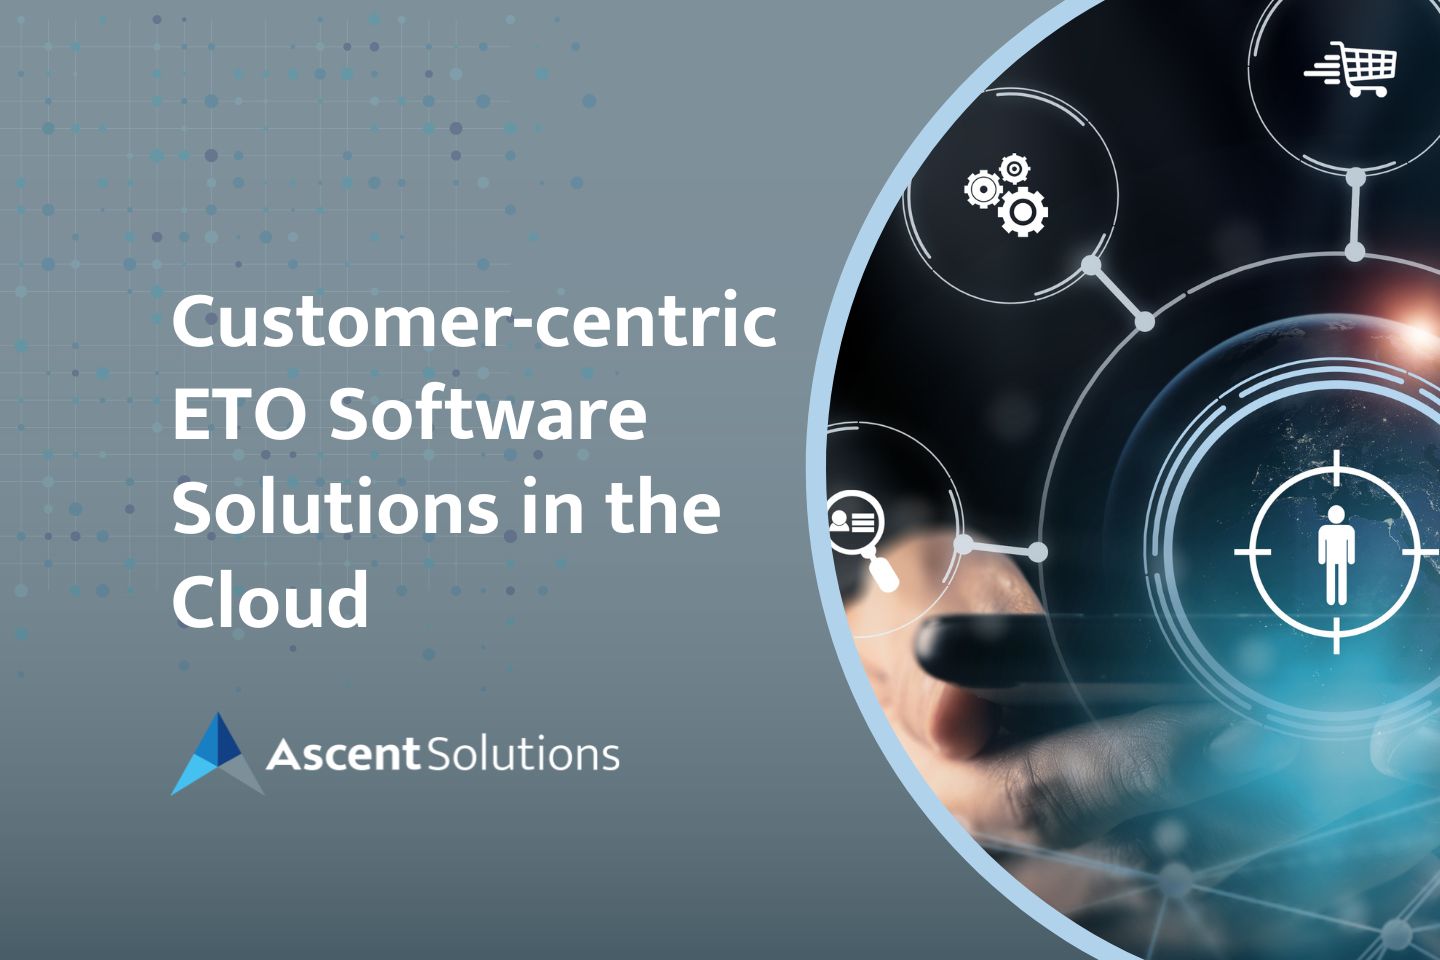 Customer-centric ETO Software Solutions in the Cloud